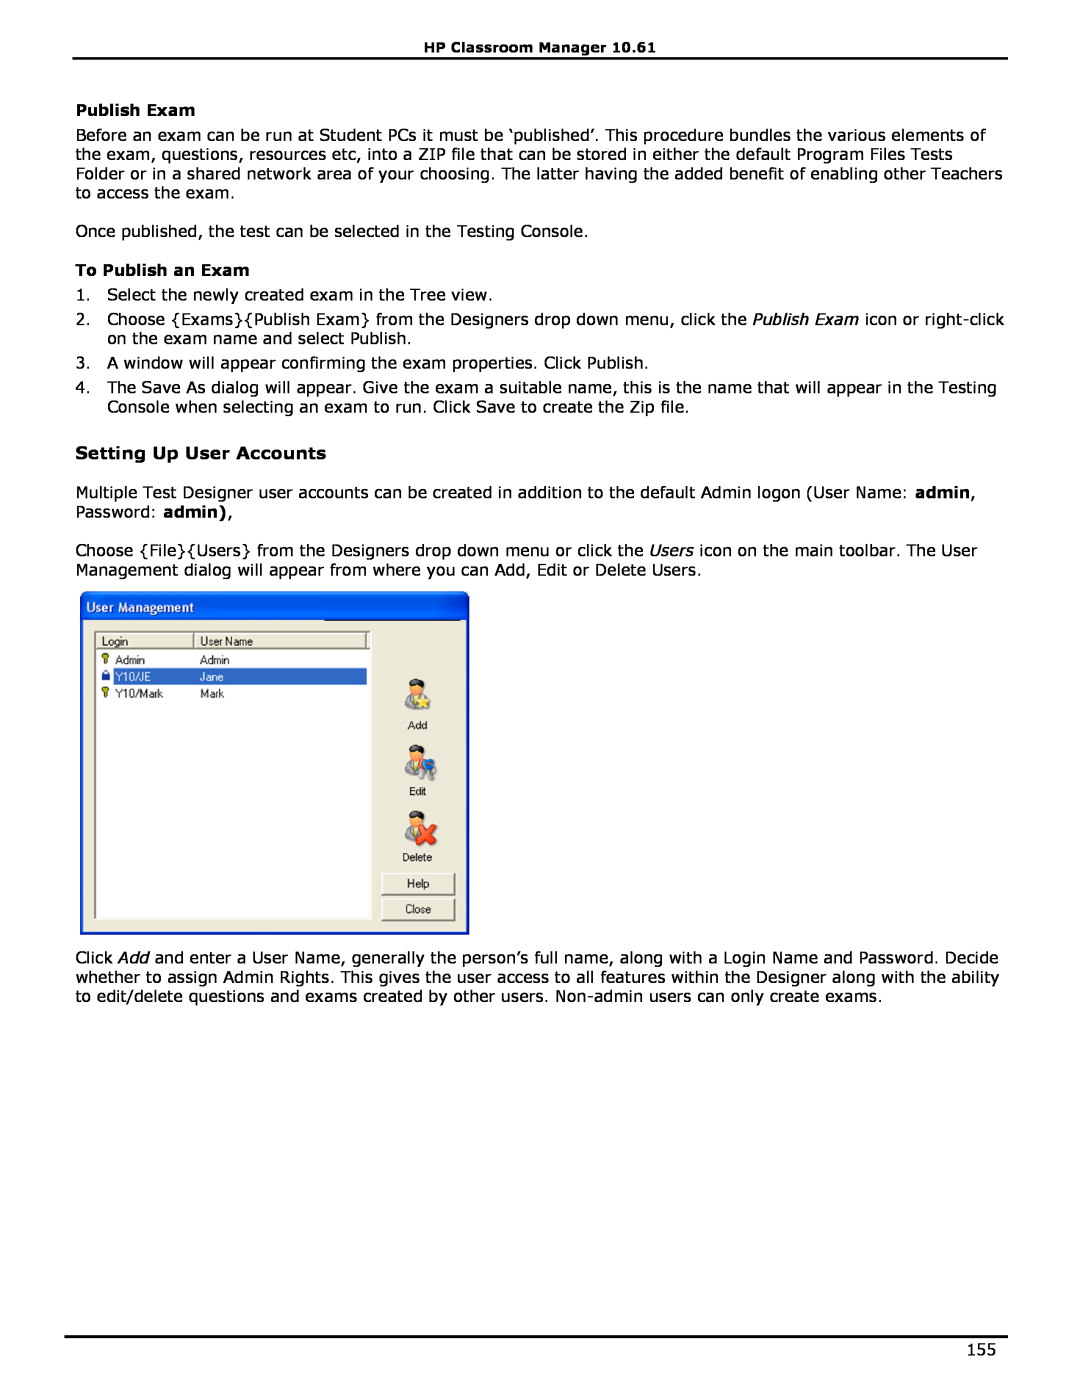 HP Classroom Manager manual Setting Up User Accounts, Publish Exam, To Publish an Exam 